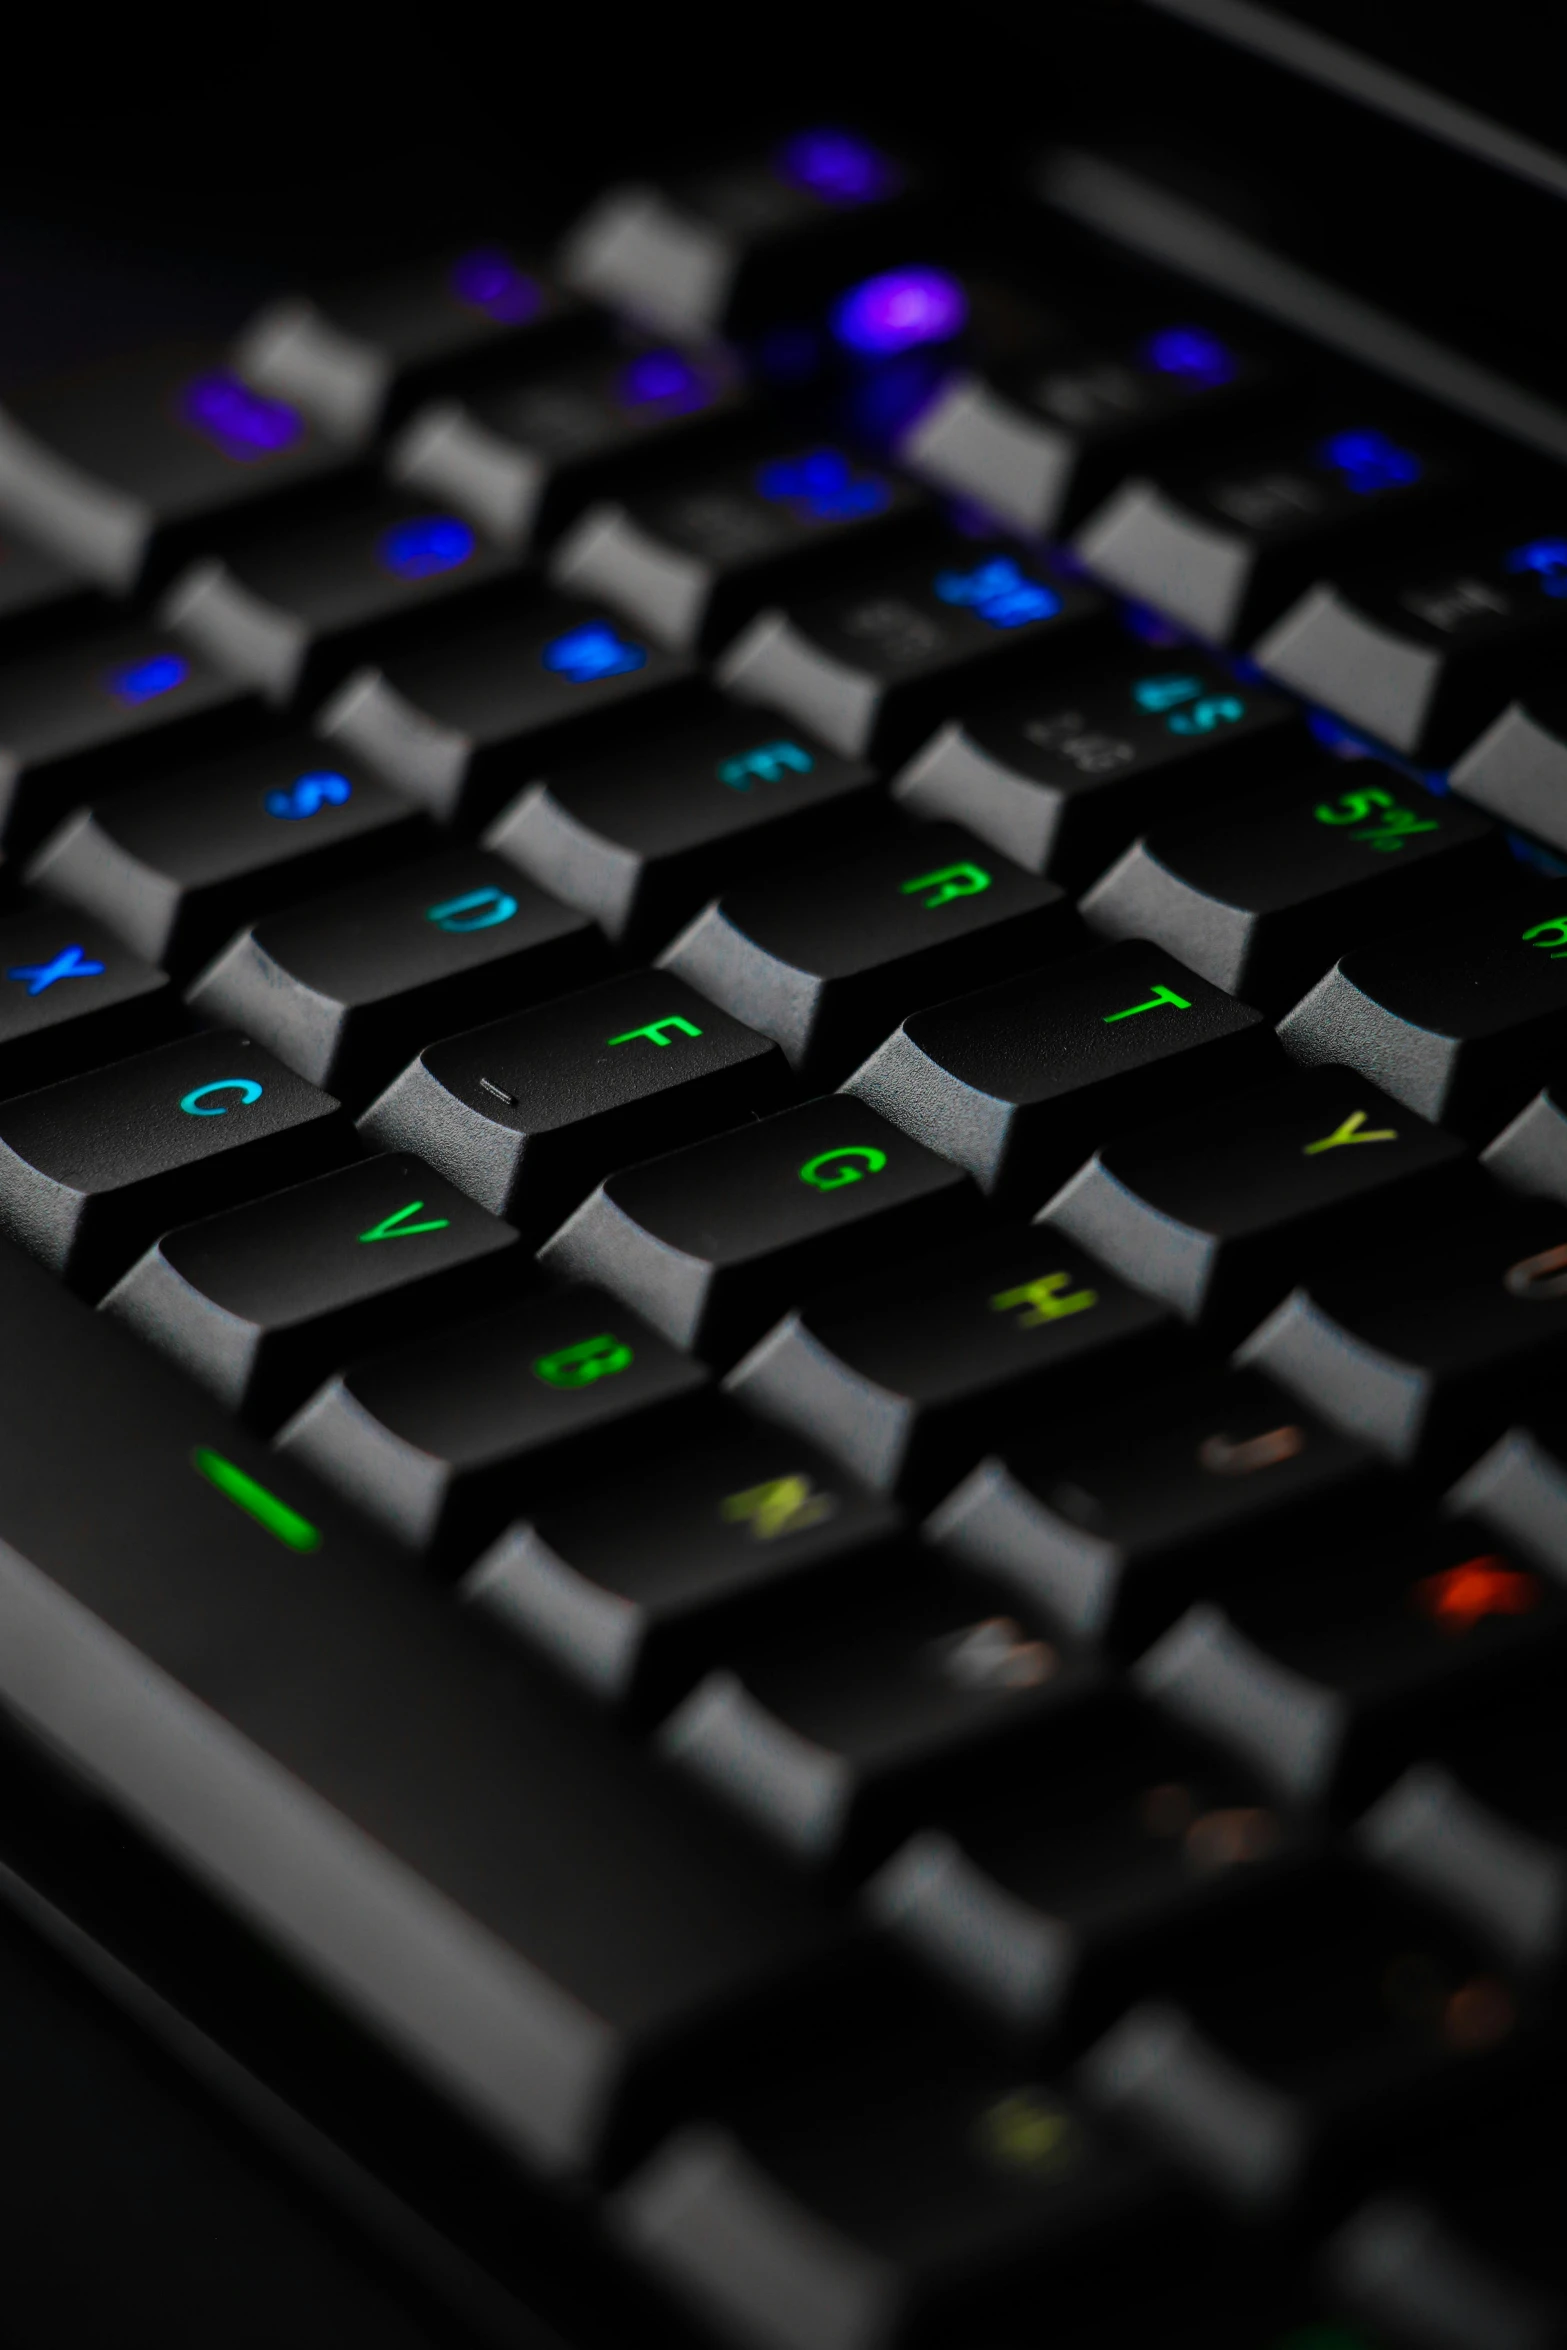 a computer keyboard is seen illuminated in blue and green